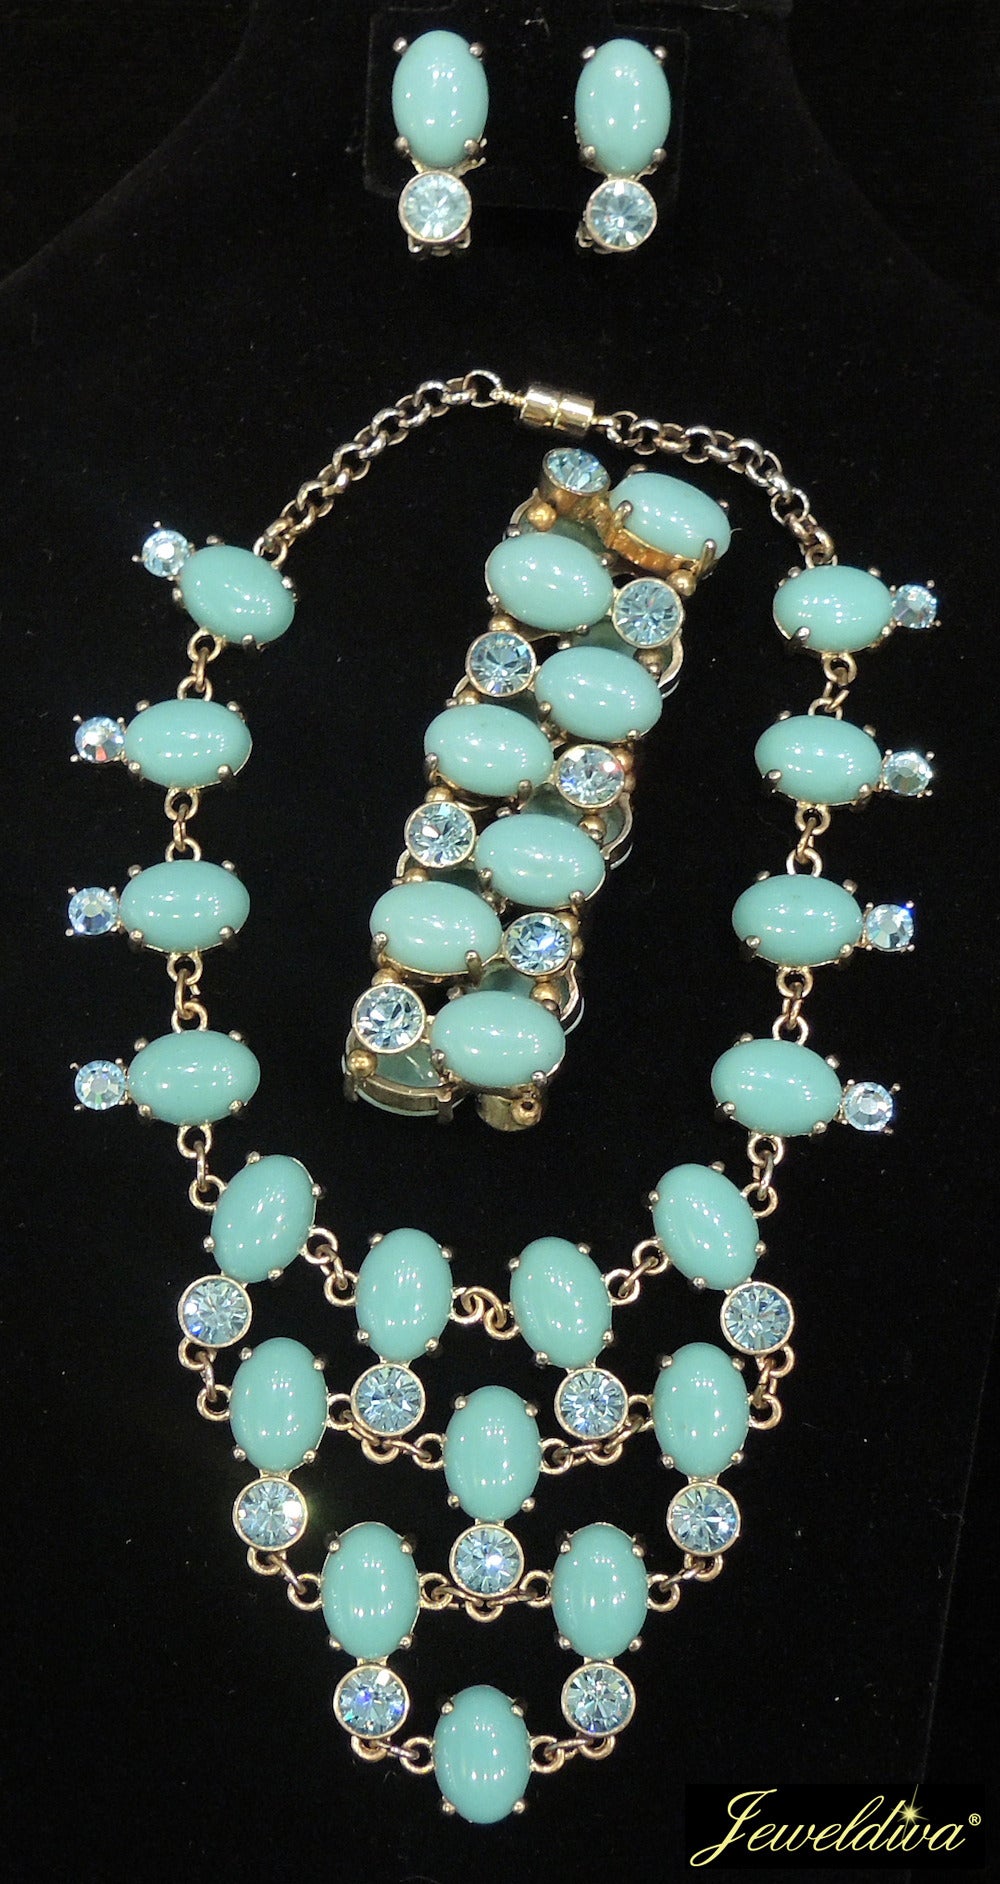 This French vintage signed “CN” set features cabochon cut faux turquoise stones with aqua color rhinestone accents in a gold-tone setting.  I was very happy to see the whole parure and I can’t figure out what year it was created.  It is very well